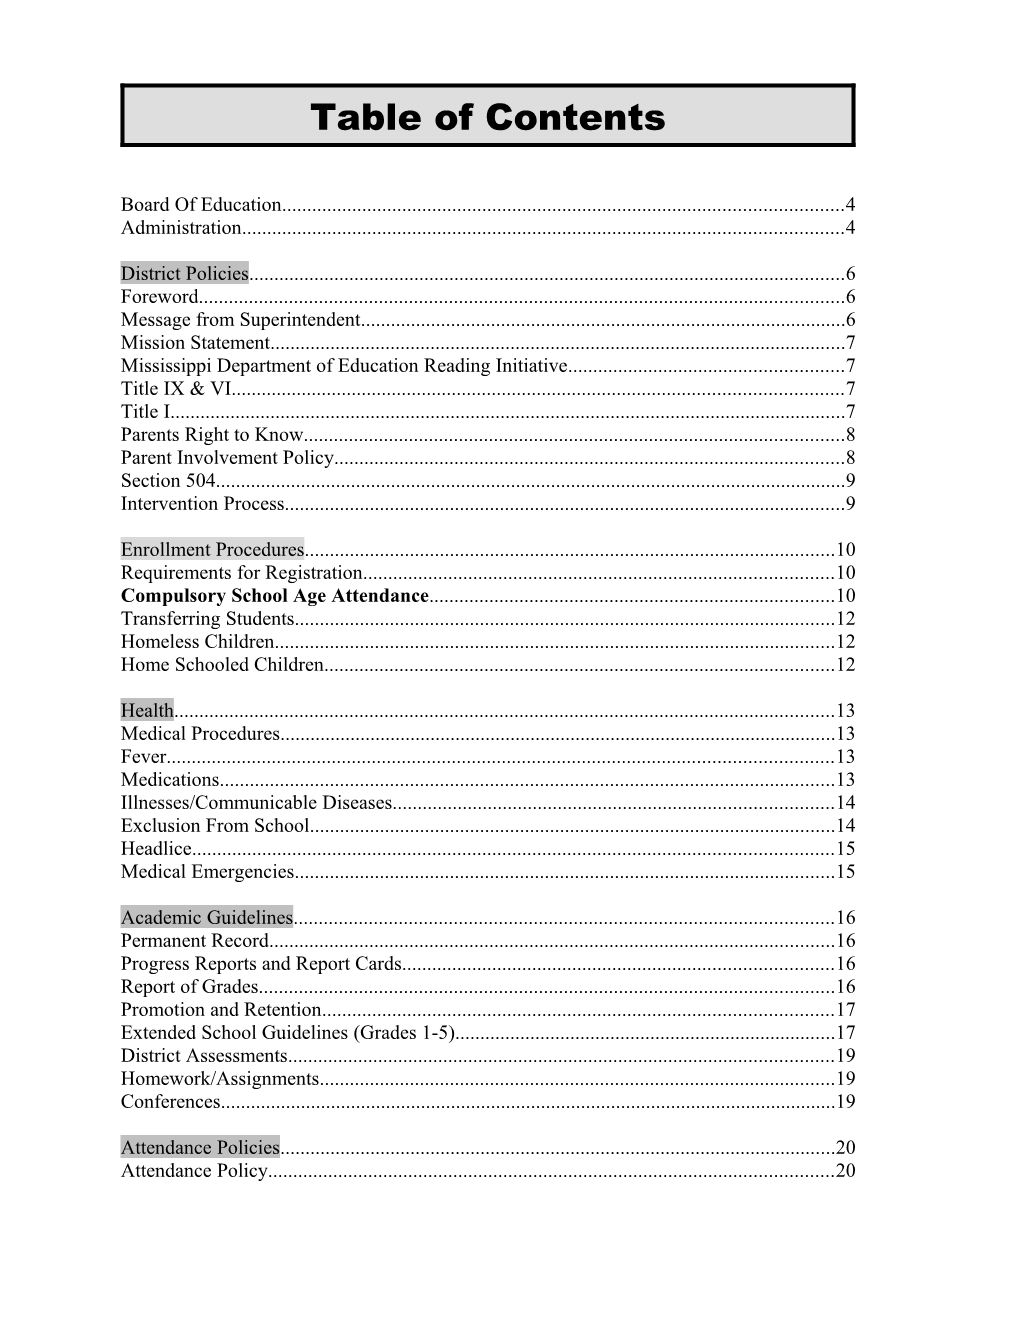 Table of Contents s96